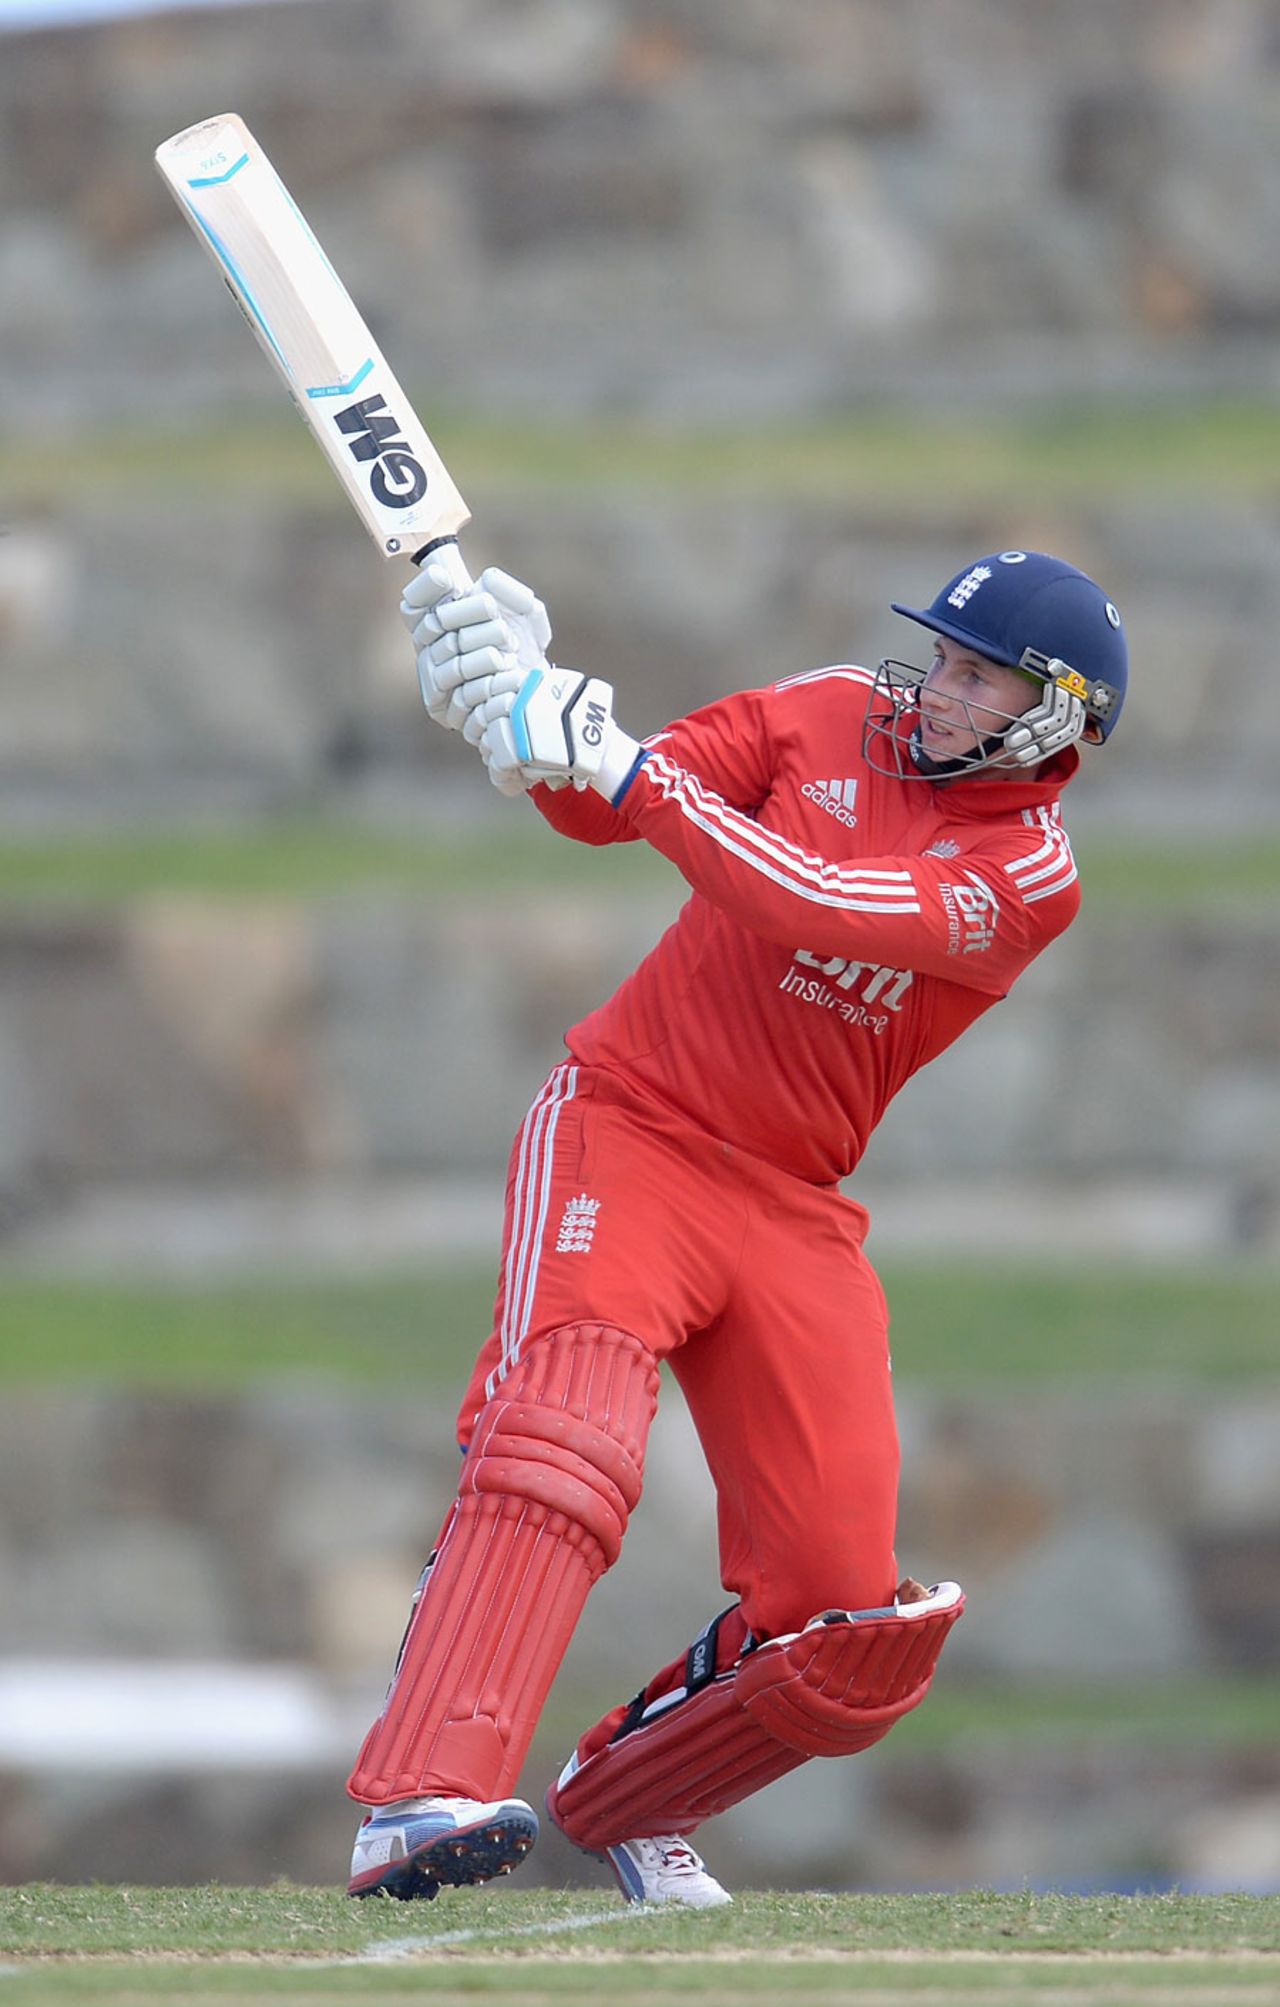 Joe Root brought out a full range of shots, UWI Vice Chancellor's XI v England XI, Tour match, North Sound, February 25, 2014